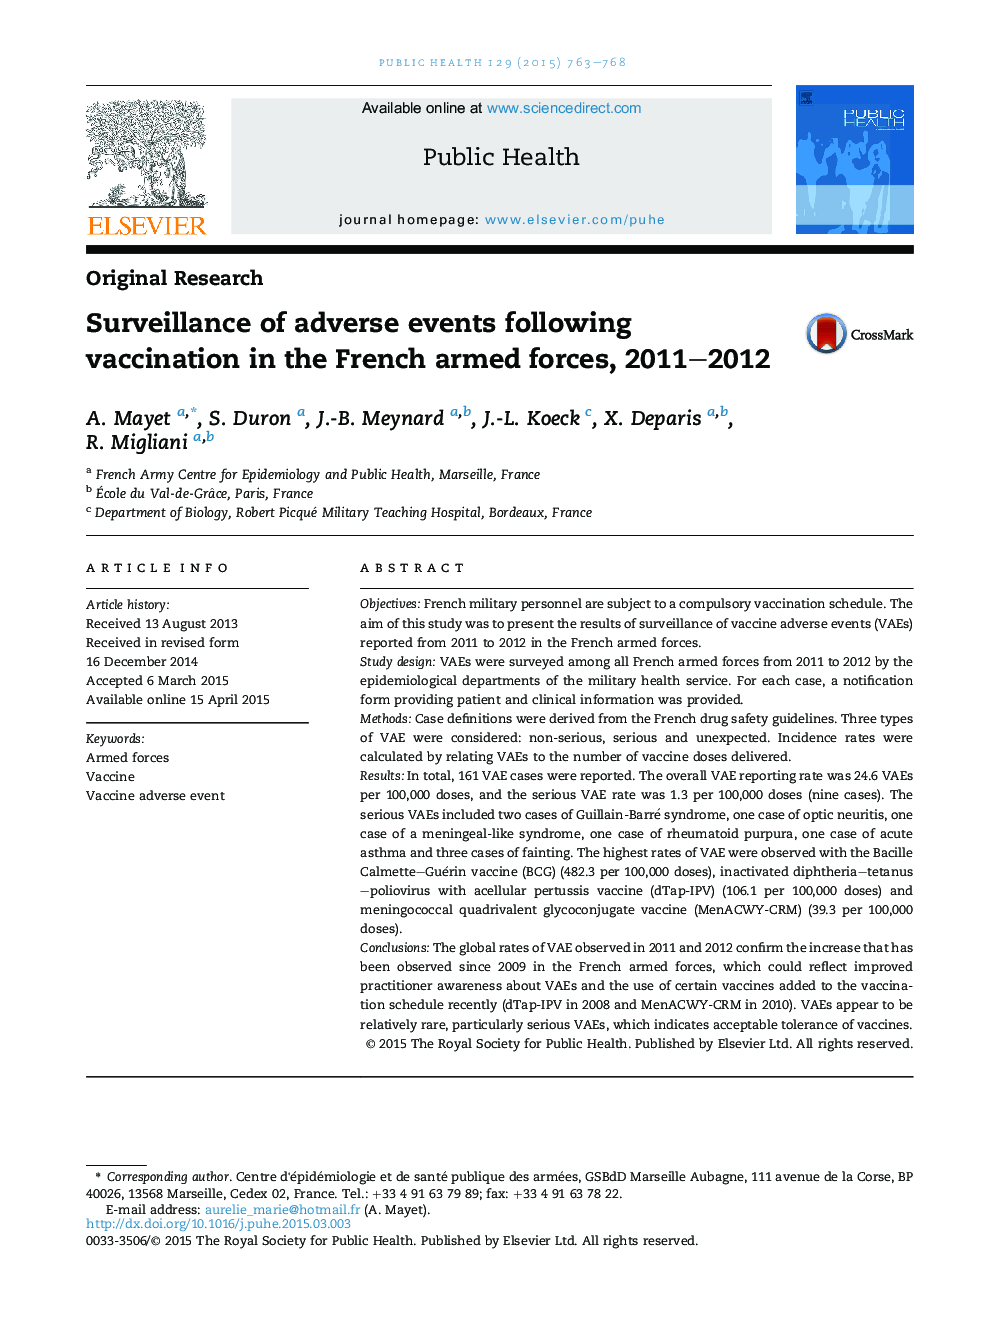 Surveillance of adverse events following vaccination in the French armed forces, 2011–2012